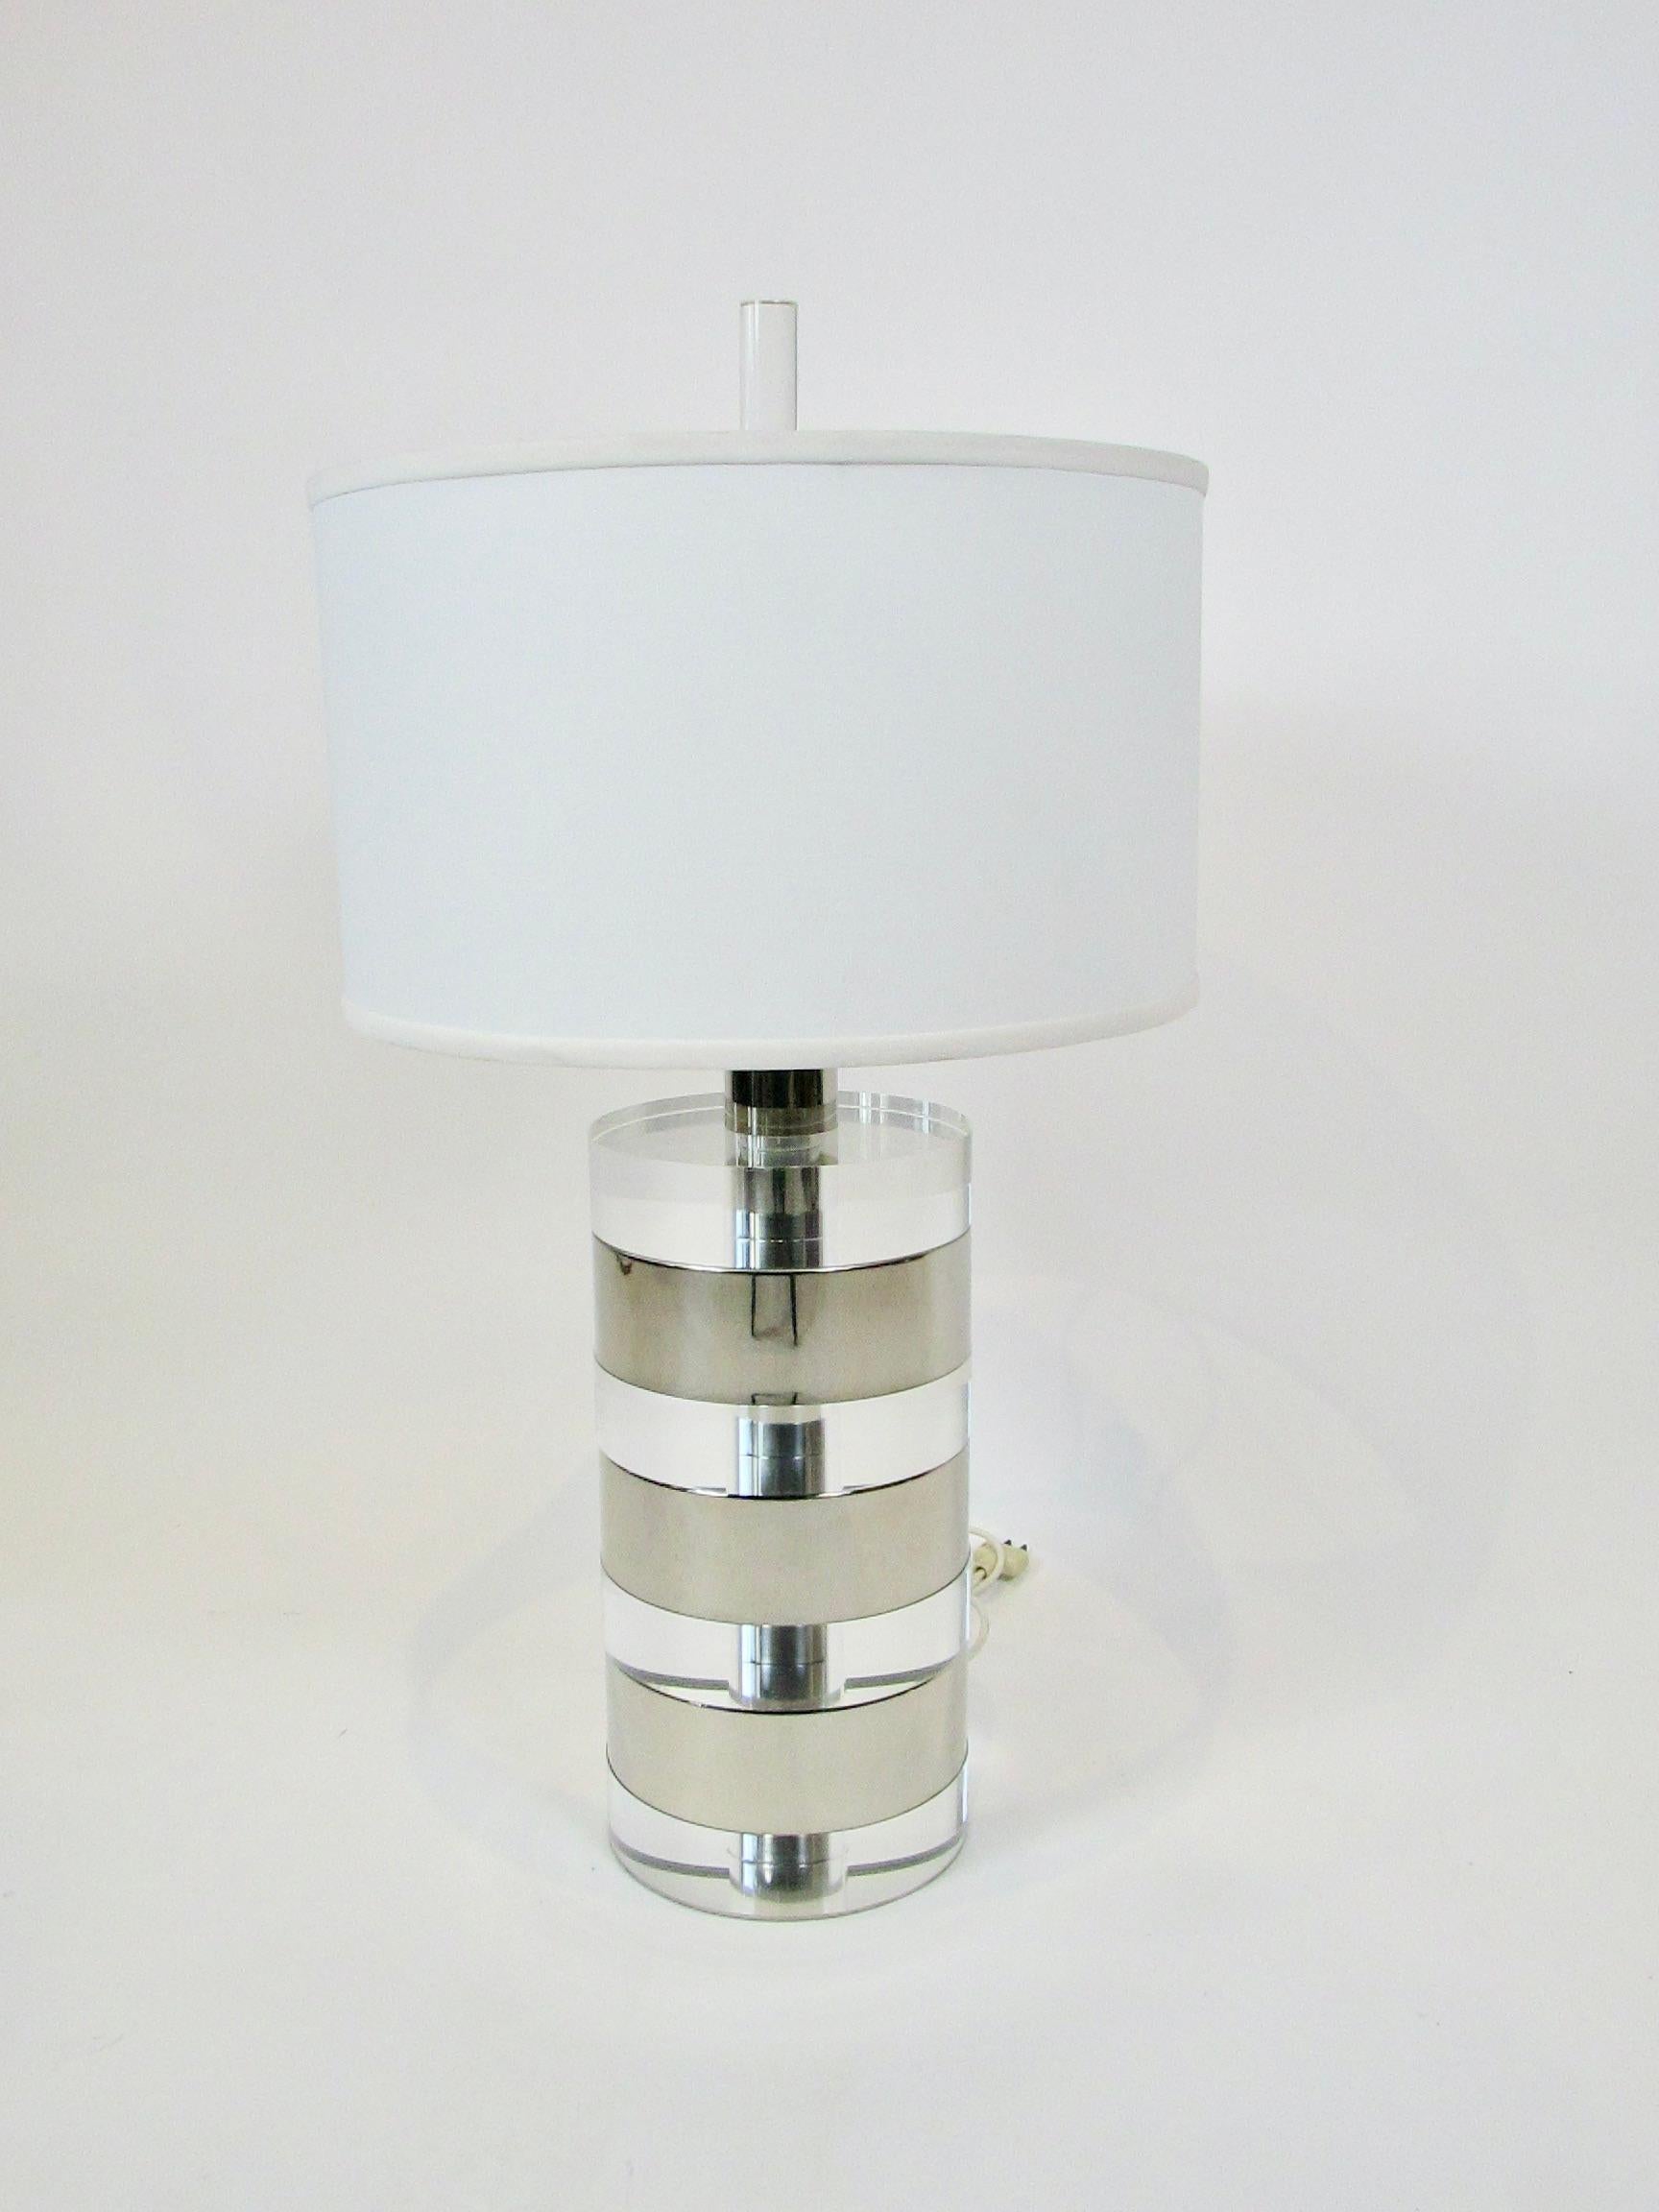 L. Bonan Italy Karl Springer era stacked lucite and nickel cylinder table lamp For Sale 4